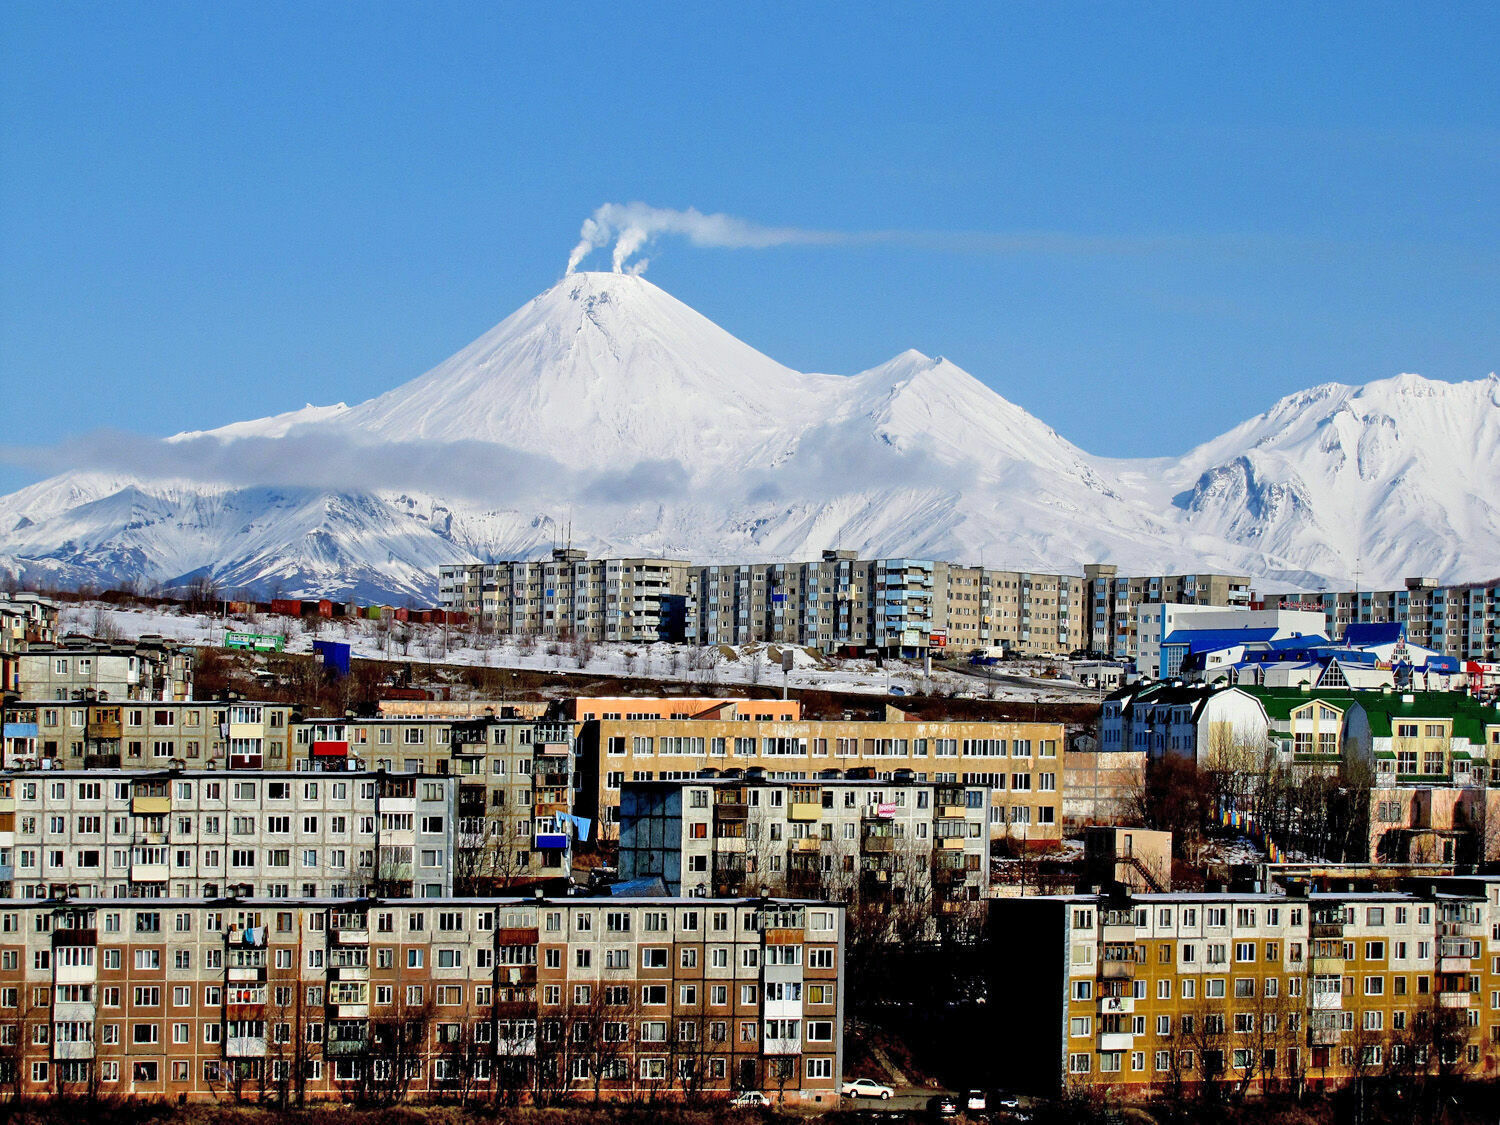 Ministry of Happiness will appear in Kamchatka